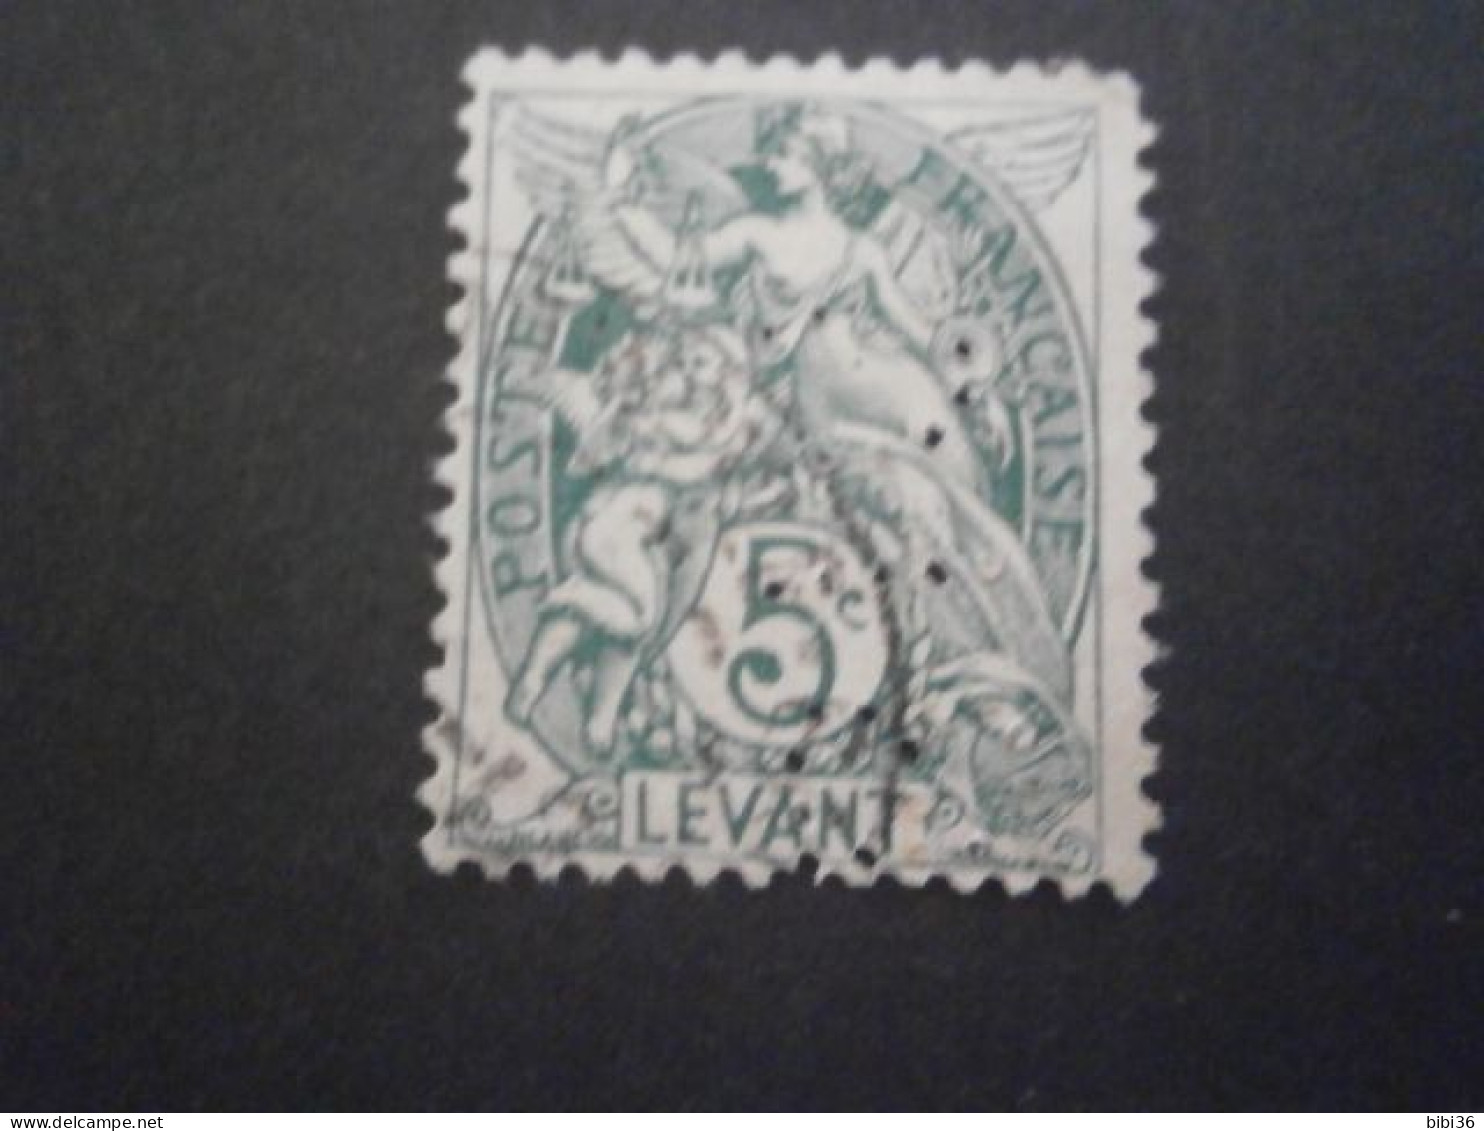 LEVANT BLANC 13 BIO2 PERFORATION PERFORES PERFORE PERFIN PERFINS PERFORATION PERFORIERT LOCHUNG PERCE PERFORIERT PERFO - Used Stamps